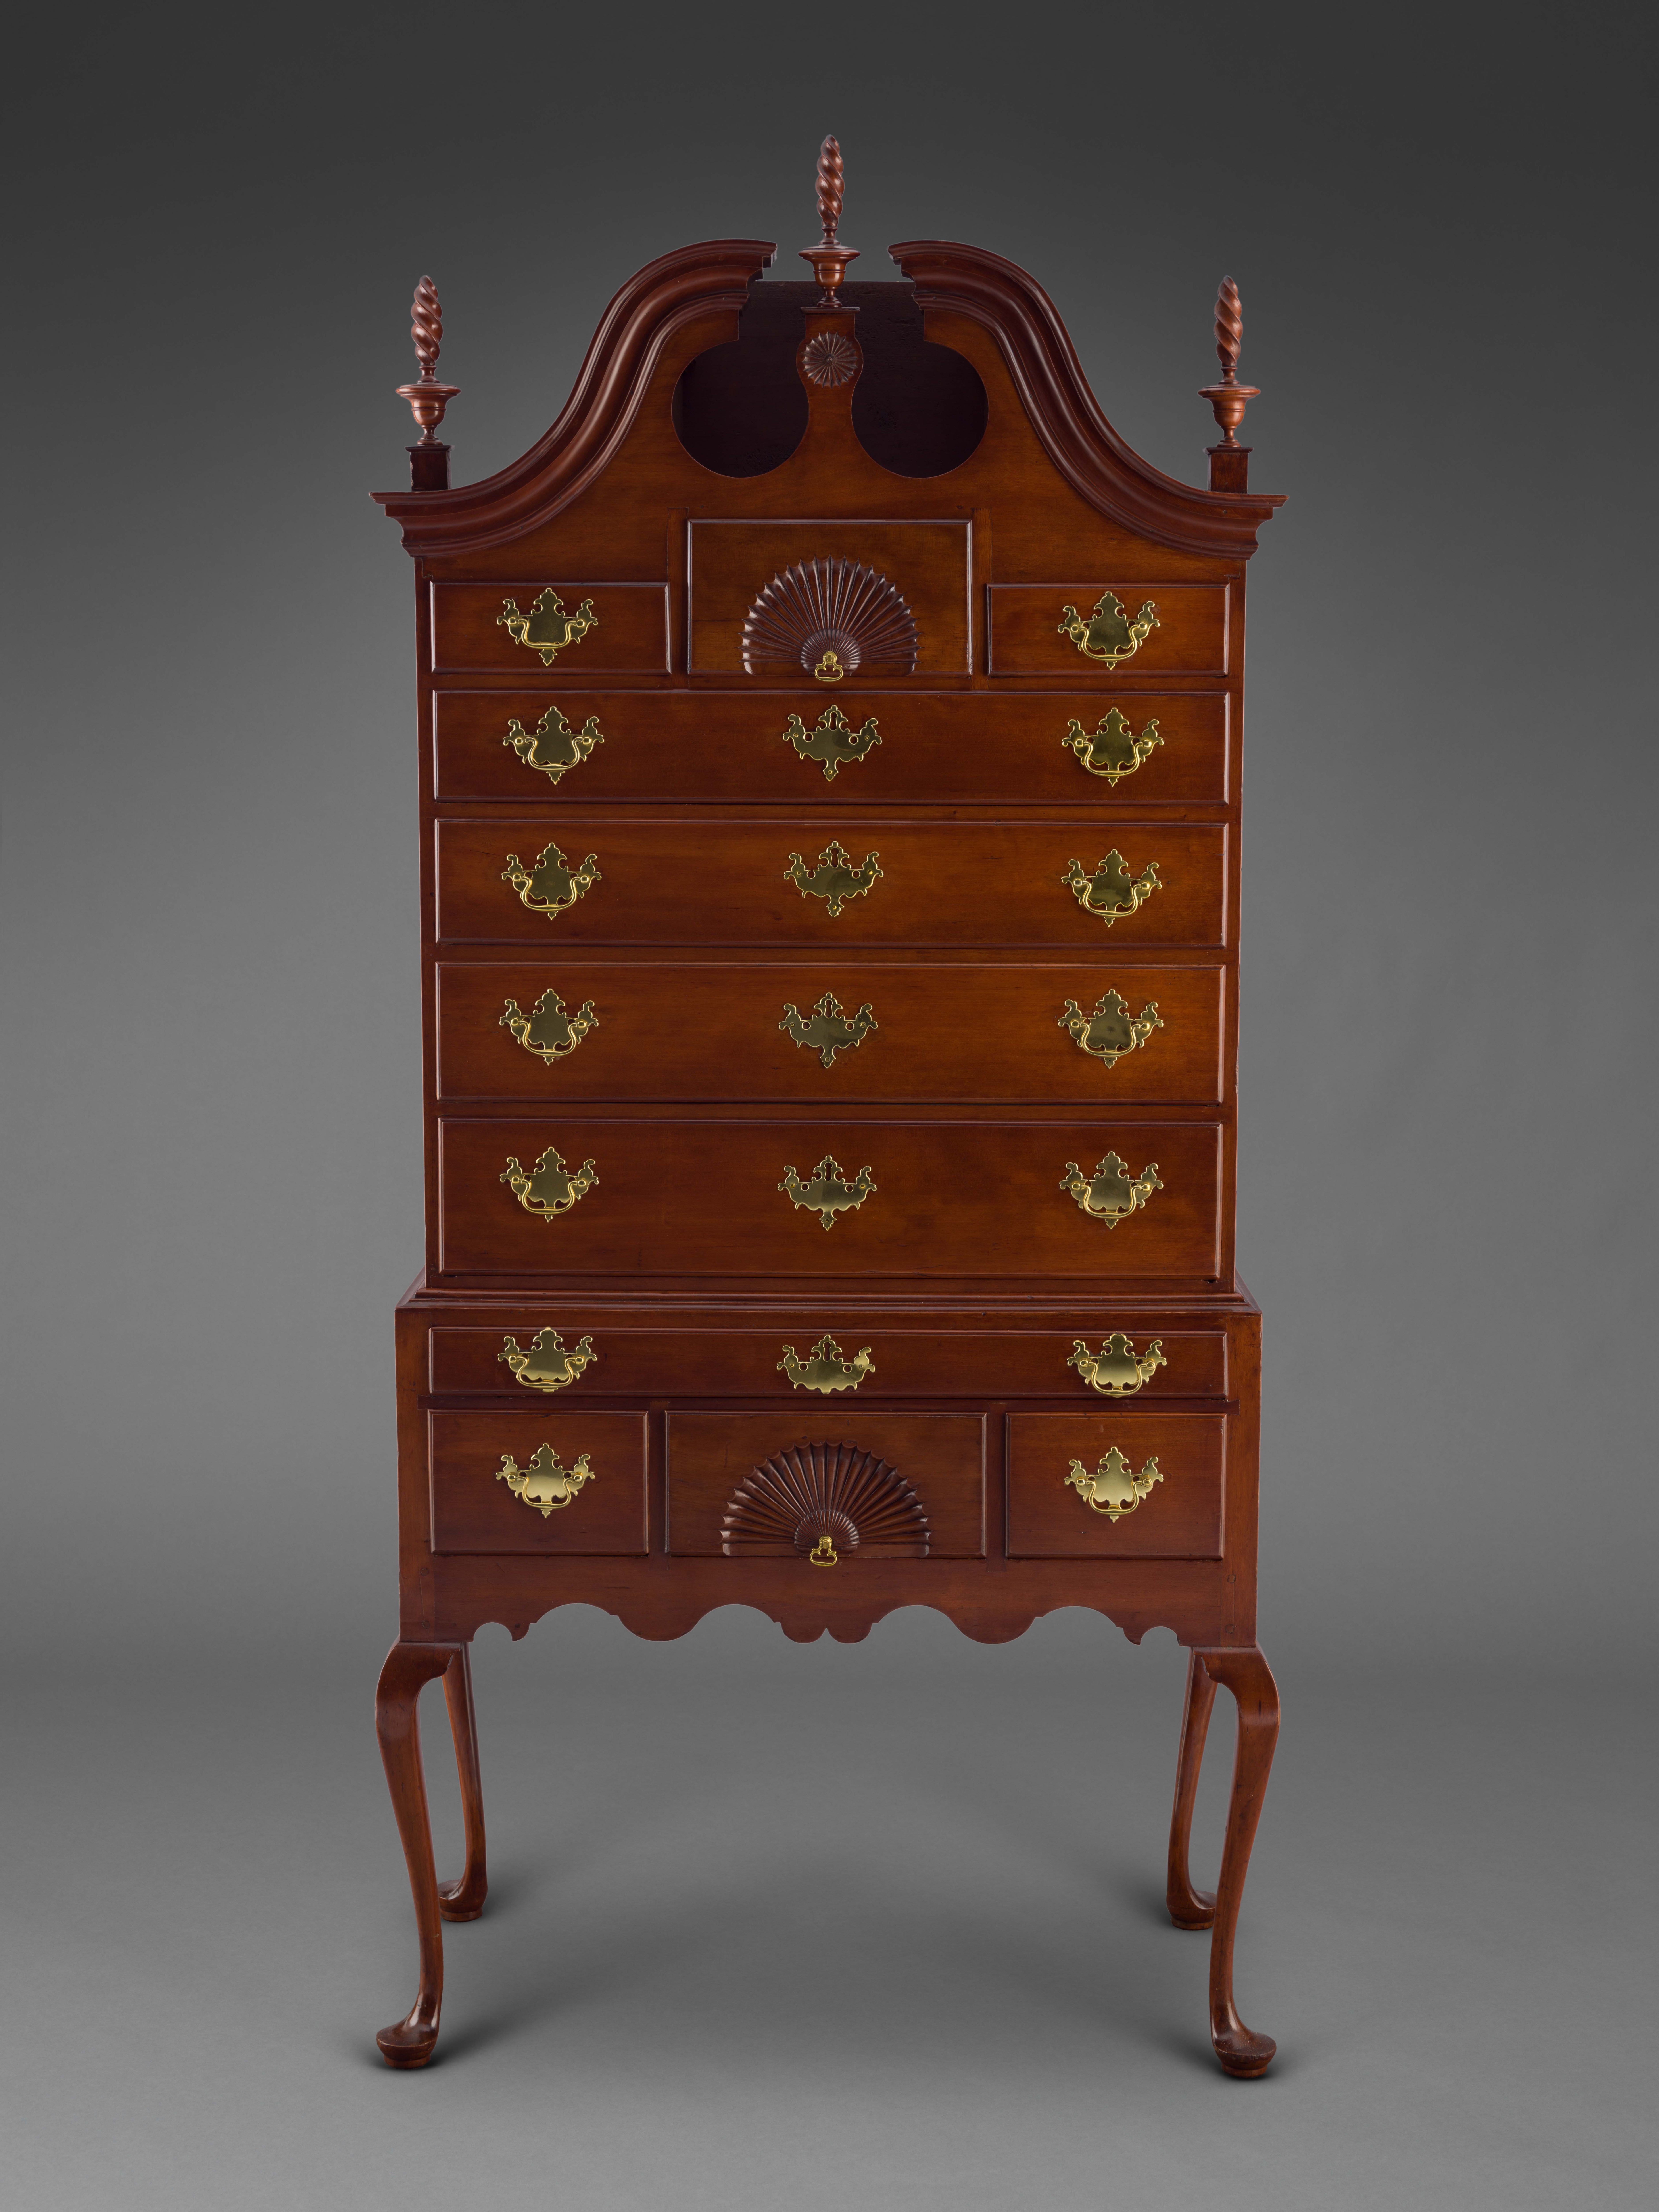 High chest of drawers, possibly made by Isaac Tryon in the Connecticut River Valley between 1760 and 1790